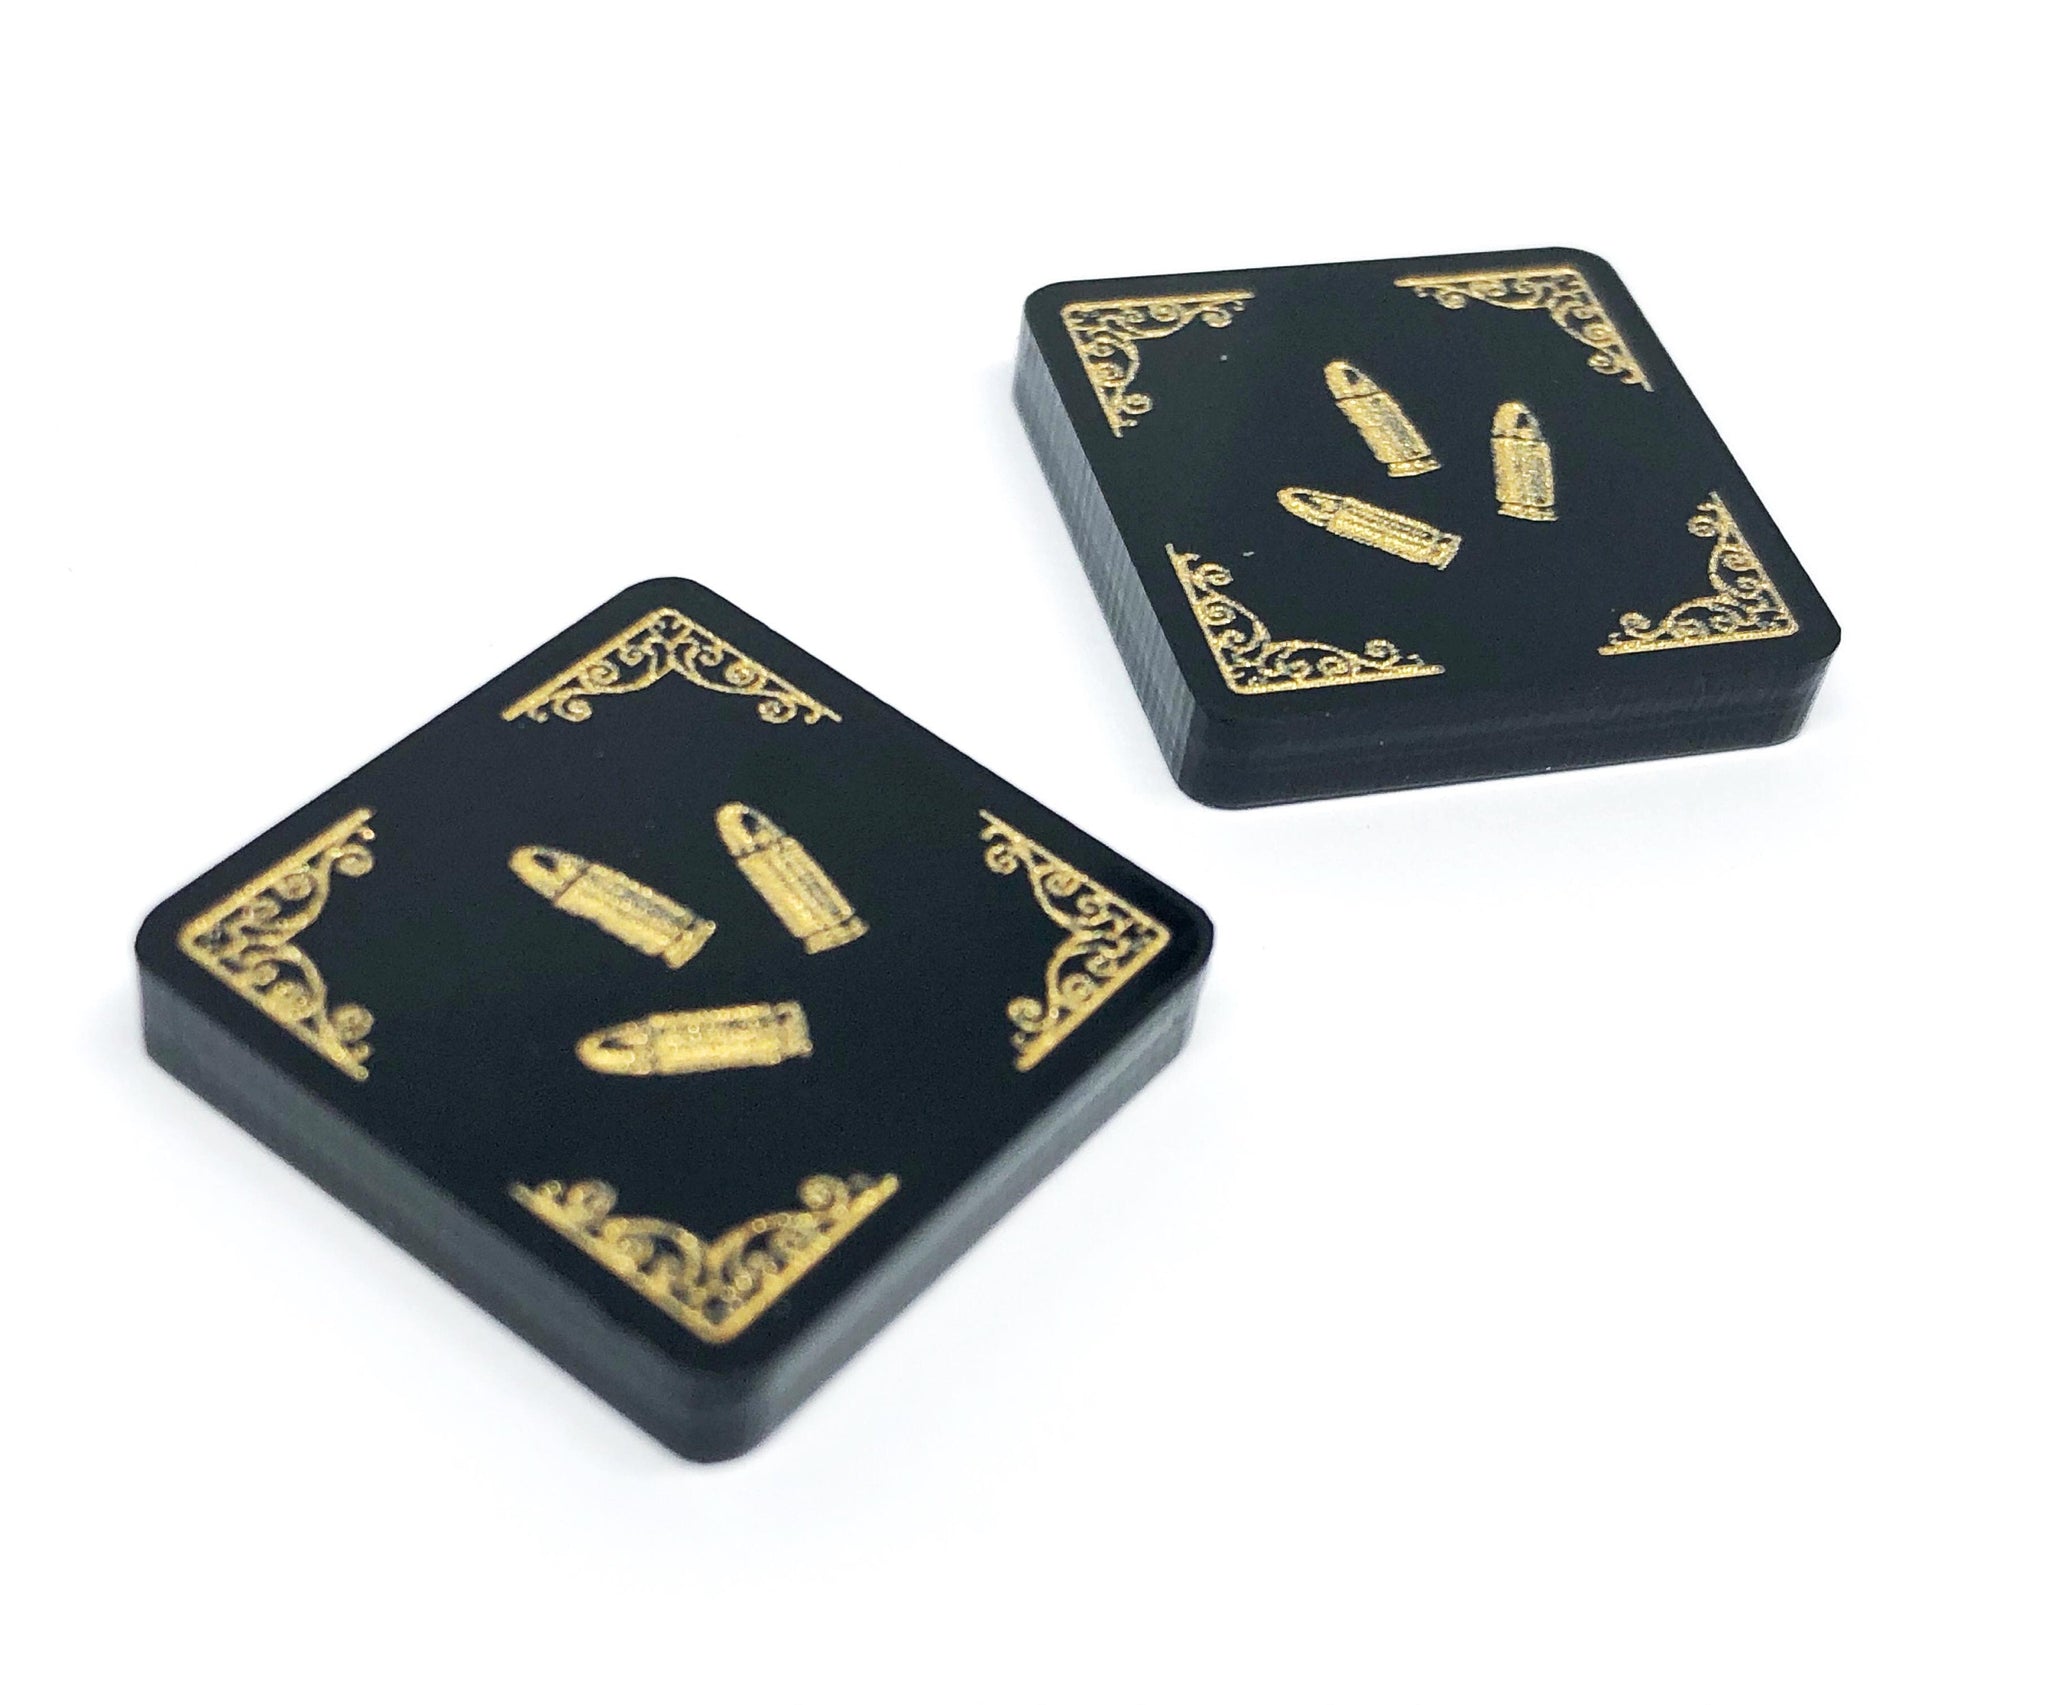 2 x Ammo Tokens (double sided) for Arkham Horror LCG